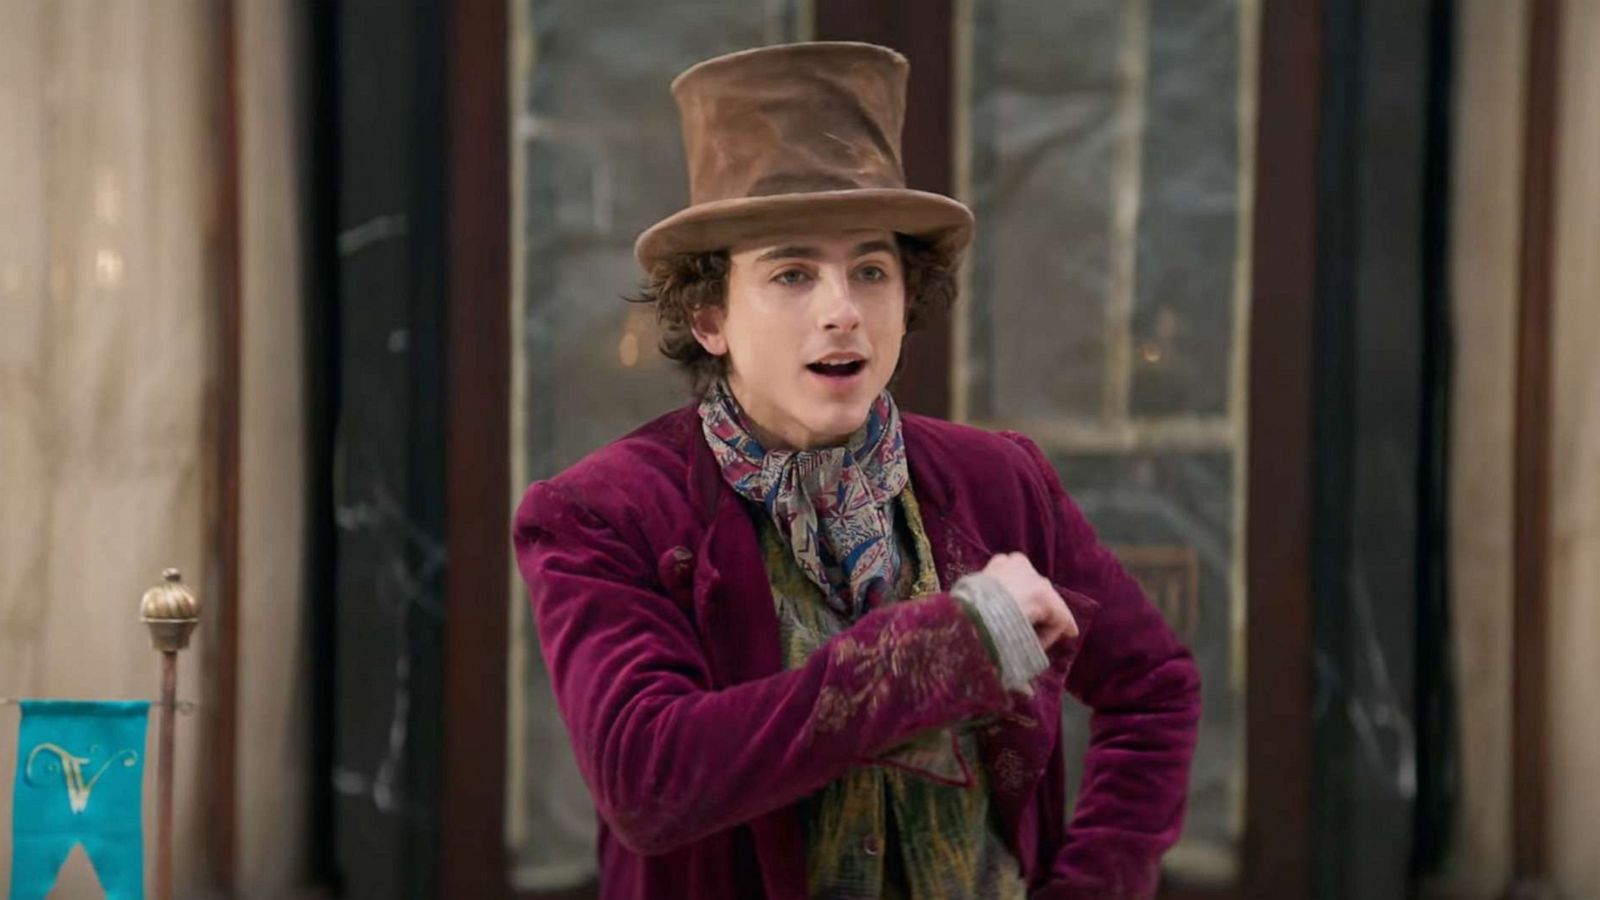 Timothée Chalamet shows us a world of pure imagination in new